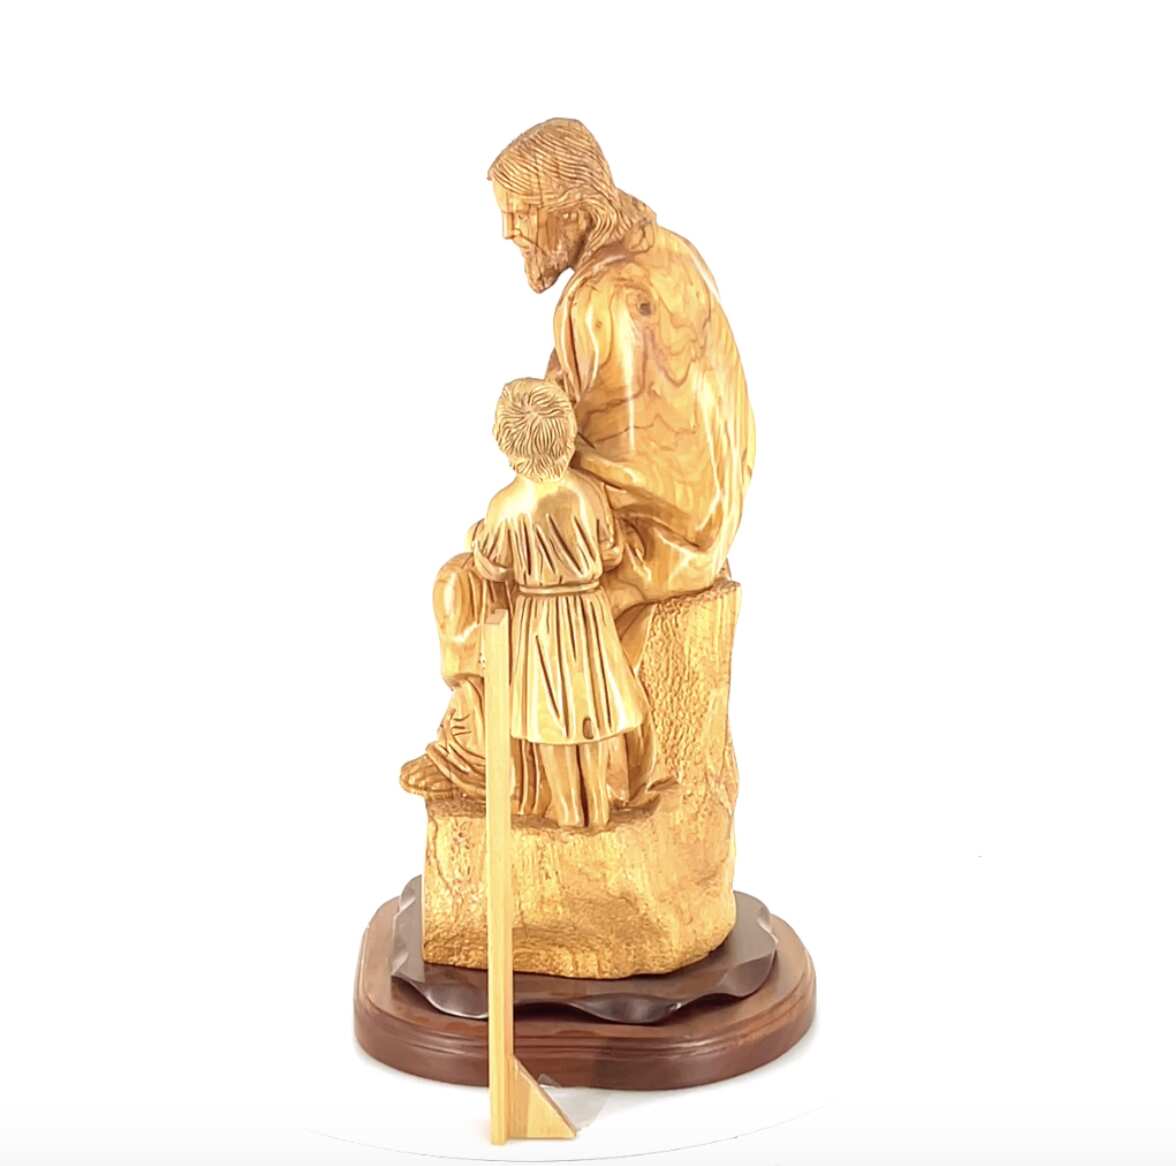 Jesus Christ, "With The Children" Masterpiece 24", Olive Wood Carved Sculpture from the Holy Land